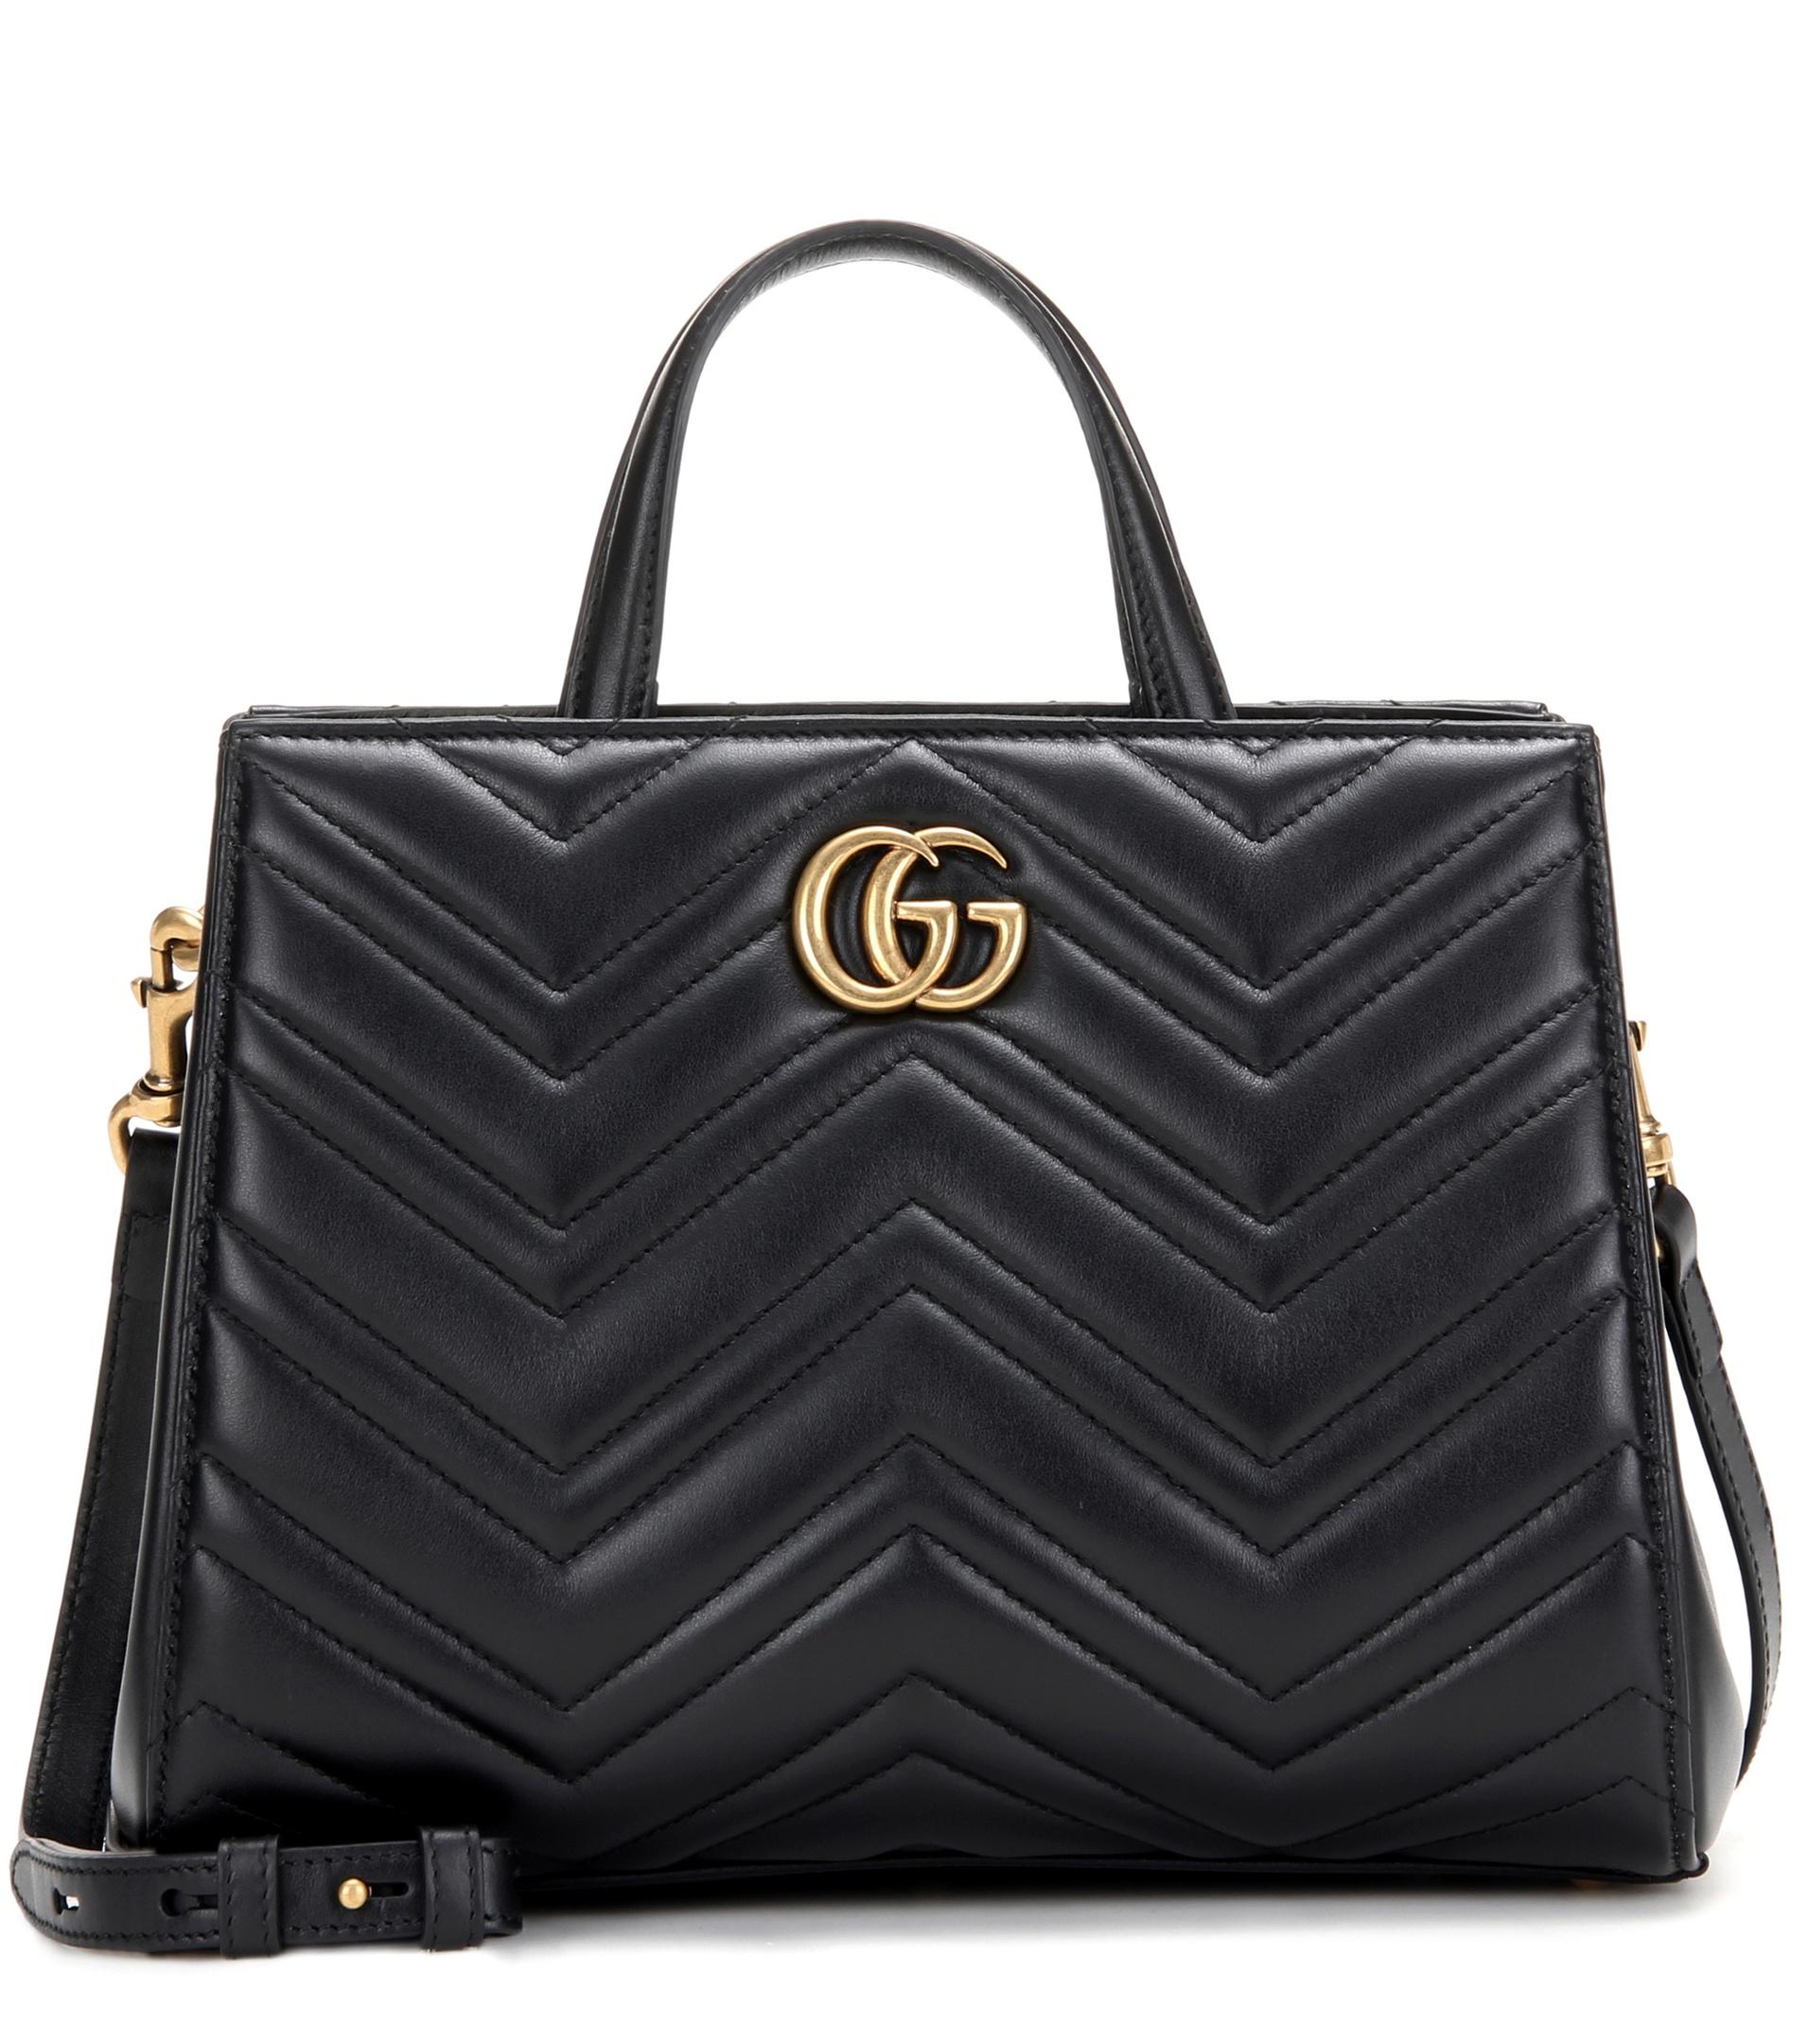 Gucci Gg Marmont Small Matelassé Leather Tote in Black - Lyst